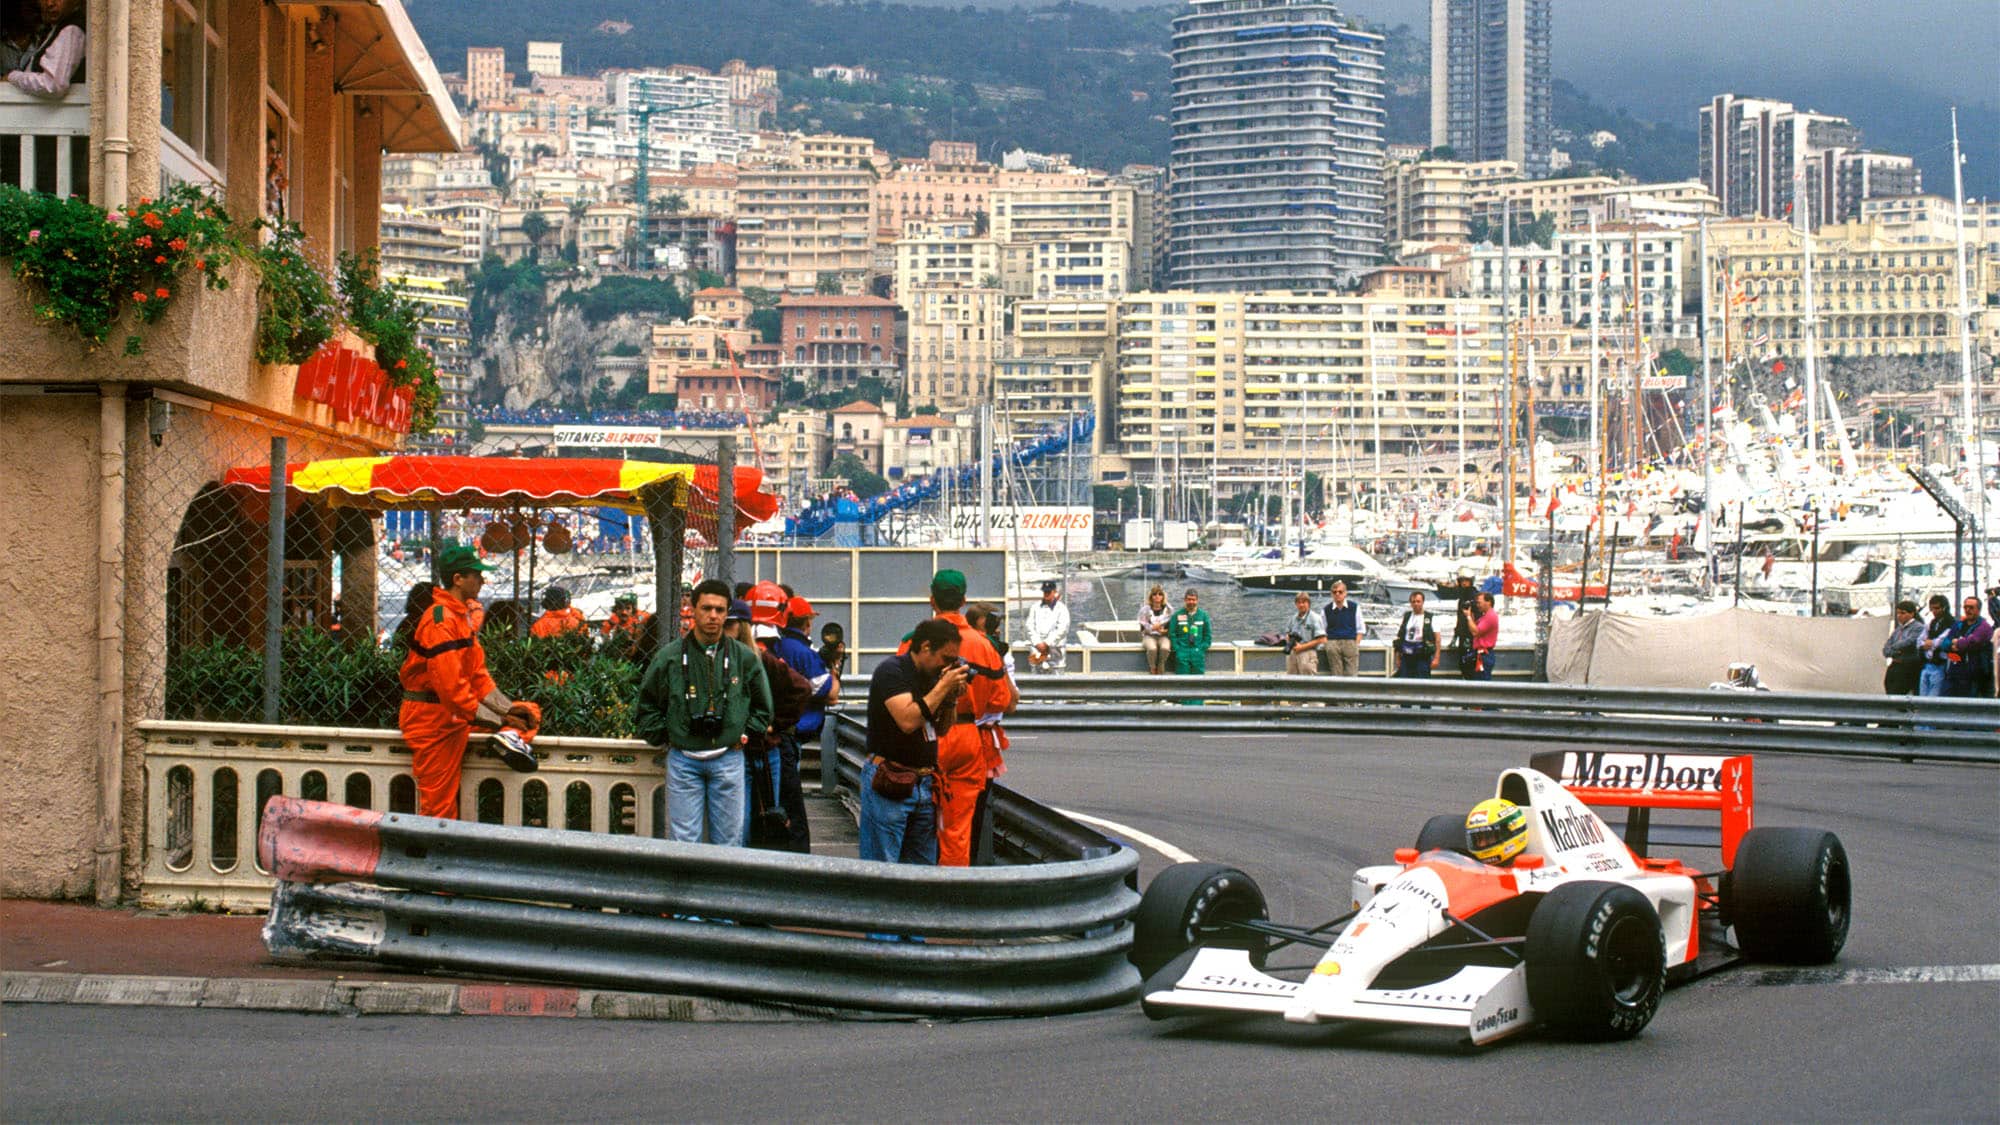 Ayrton Senna in the McLaren-Honda at La Rascasse corner leaving the quayside. Went on to win the race. Monaco GP, 12 May 1991. (Photo by: GP Library/Universal Images Group via Getty Images)